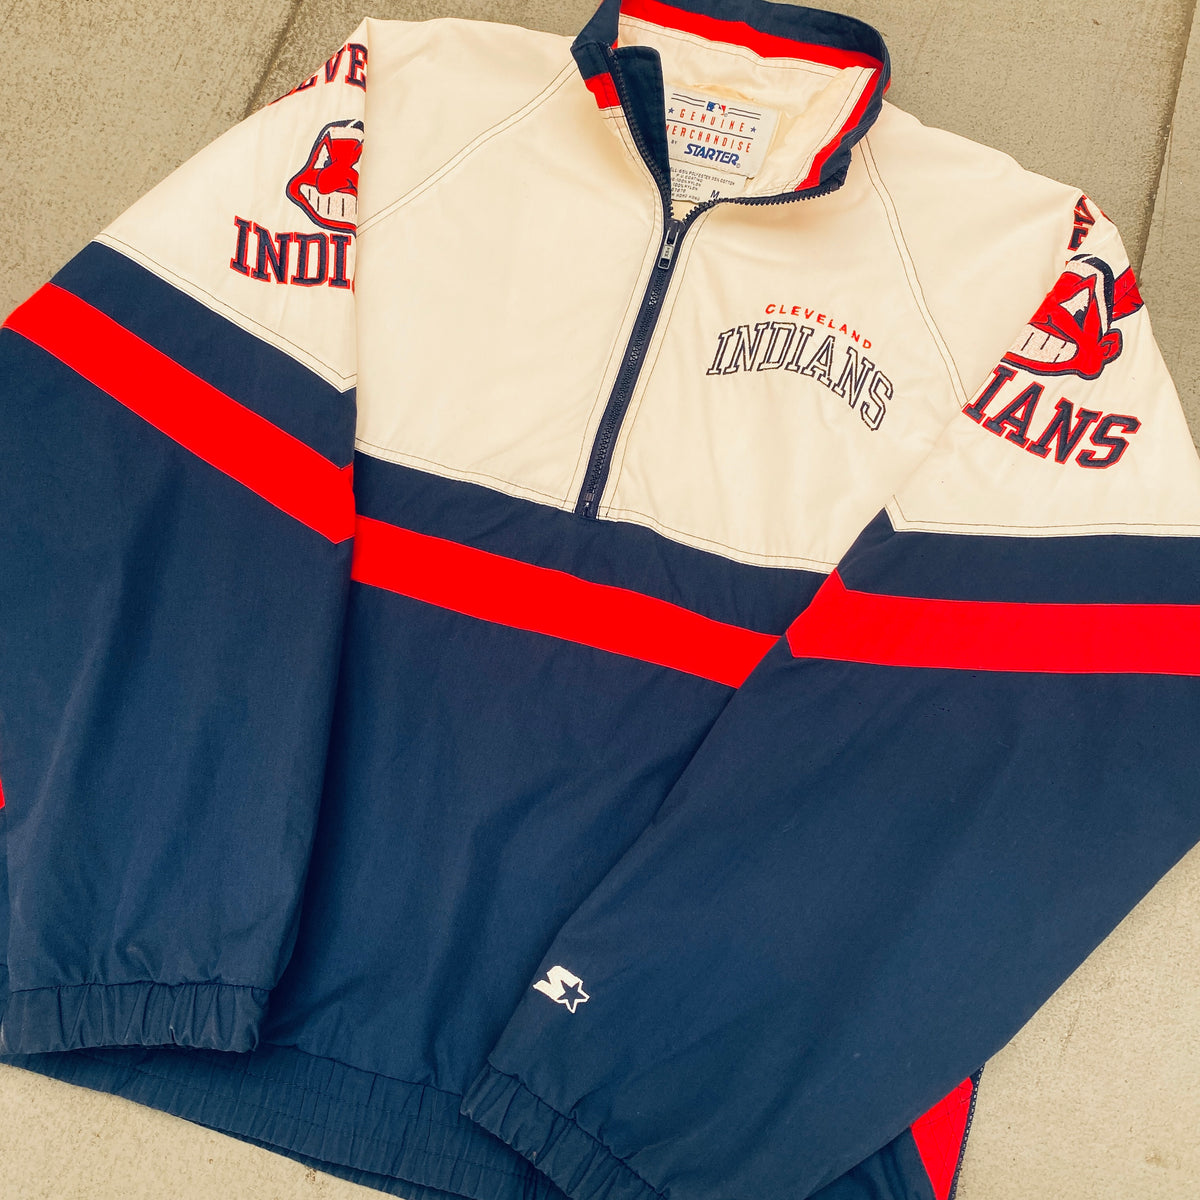 NHL Starter Jackets and League Apparel